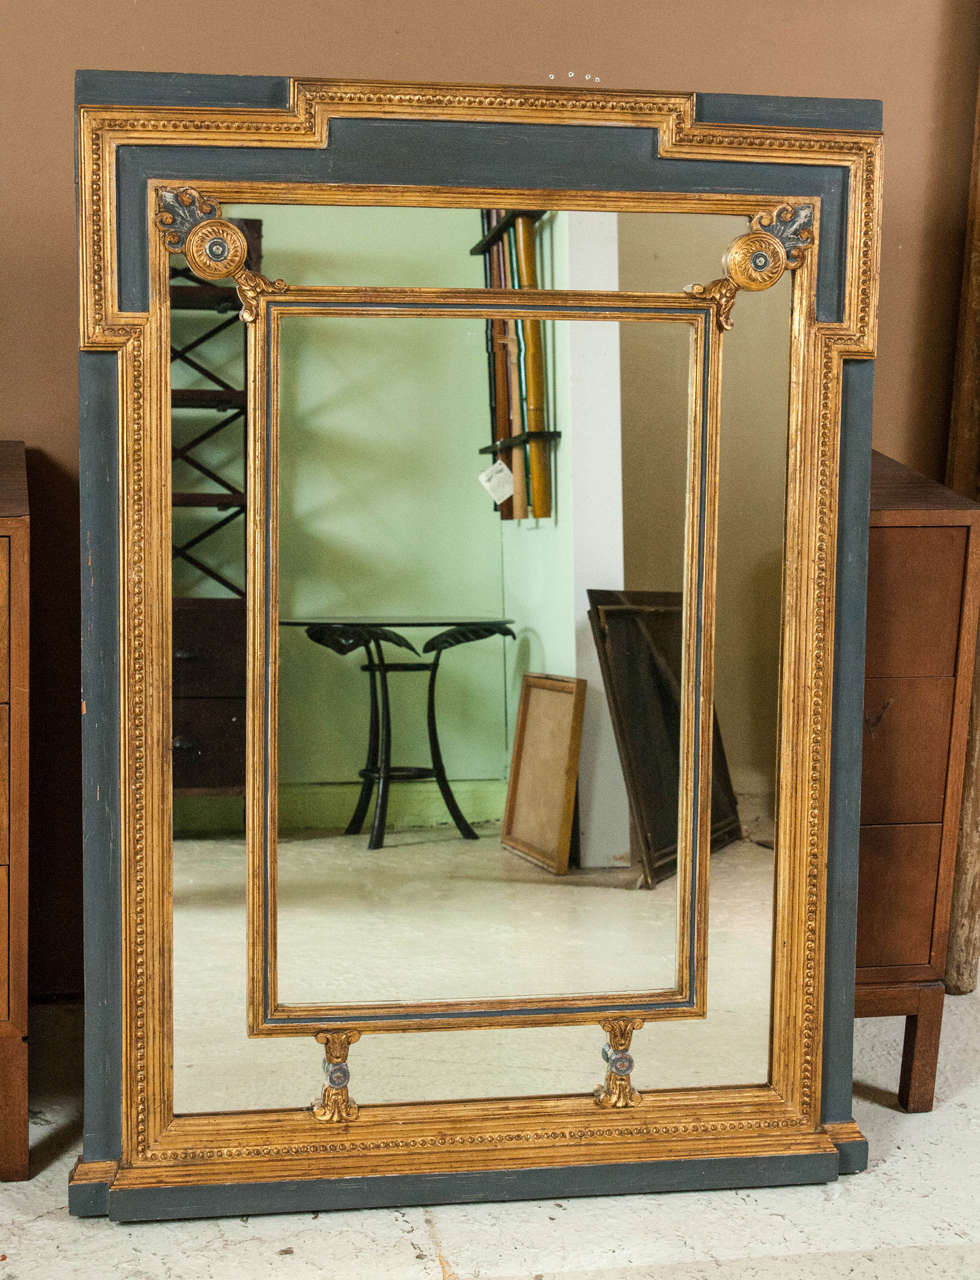 A parcel paint and gilt gold decorated wall or console mirror. A wooden rectangular Swedish style paint decorated mirror. The gray paint frame surrounding a gilt gold rectangular molding forming a three dimensional box. This fine quality mirror